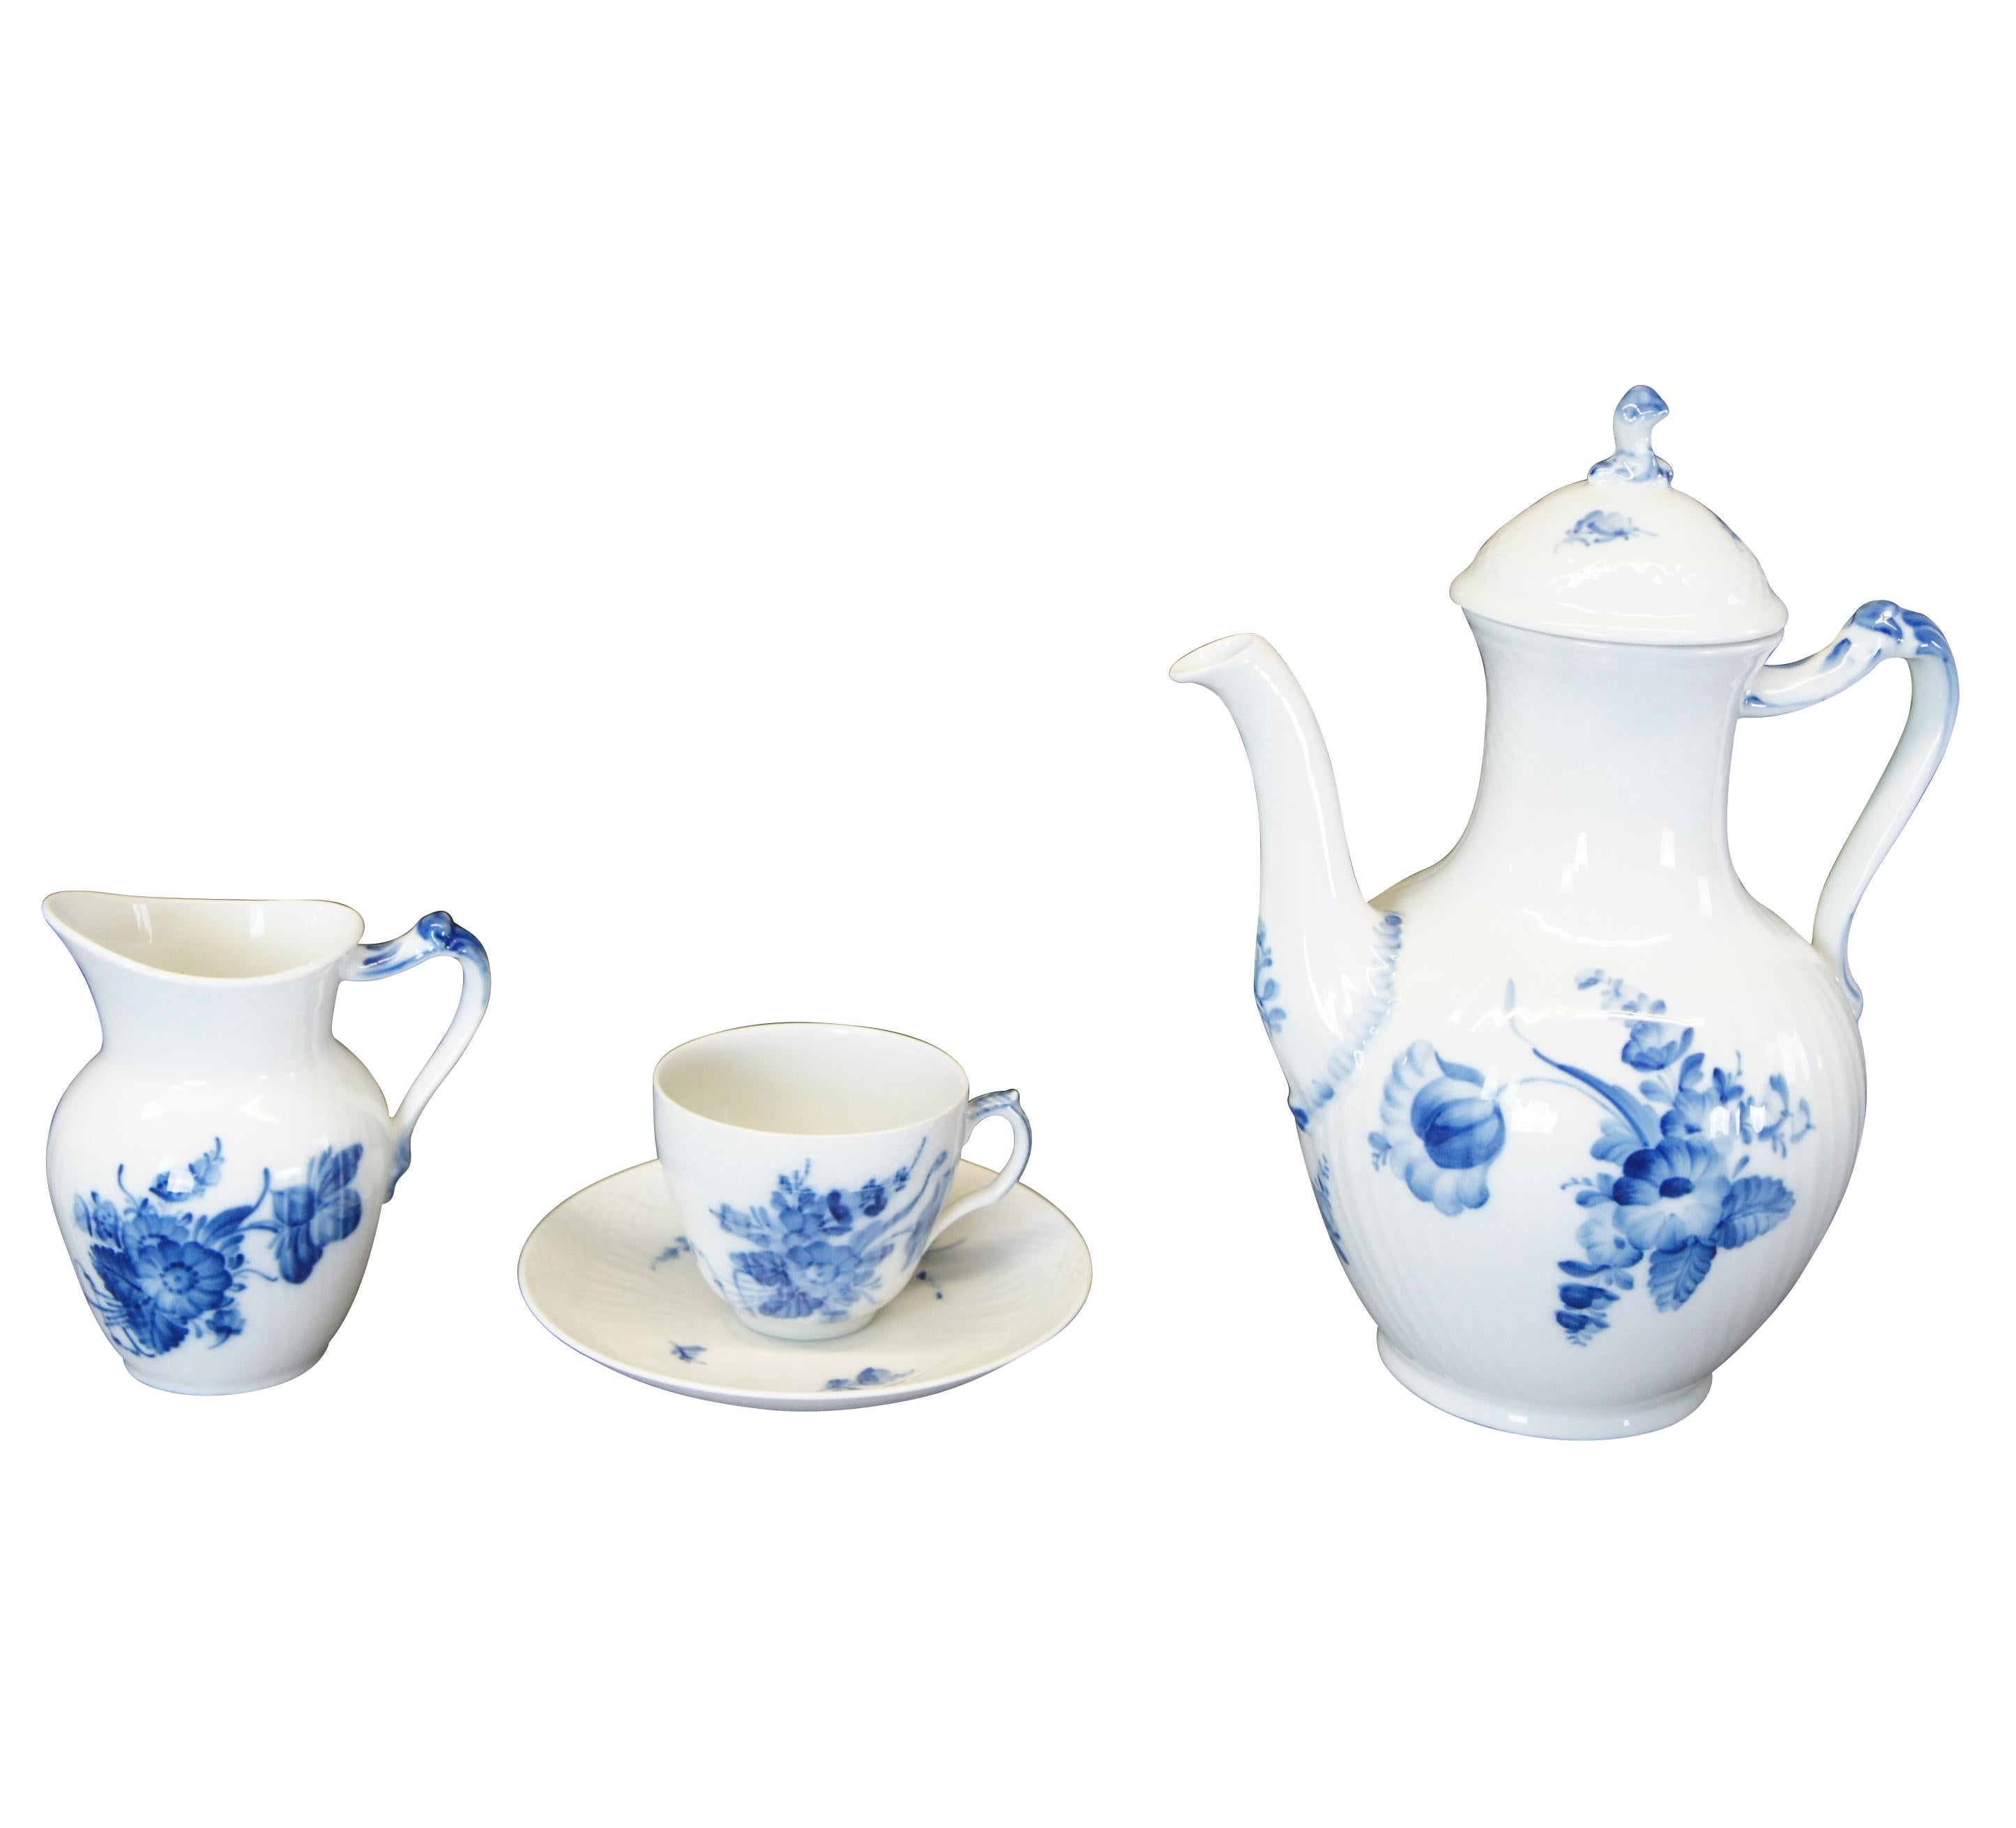 Royal Copenhagen Denmark tea set. Features service for 8 with sugar, creamer and coffee / tea pot. Made from porcelain with blue flowers pattern.


DIMENSIONS

Standard.